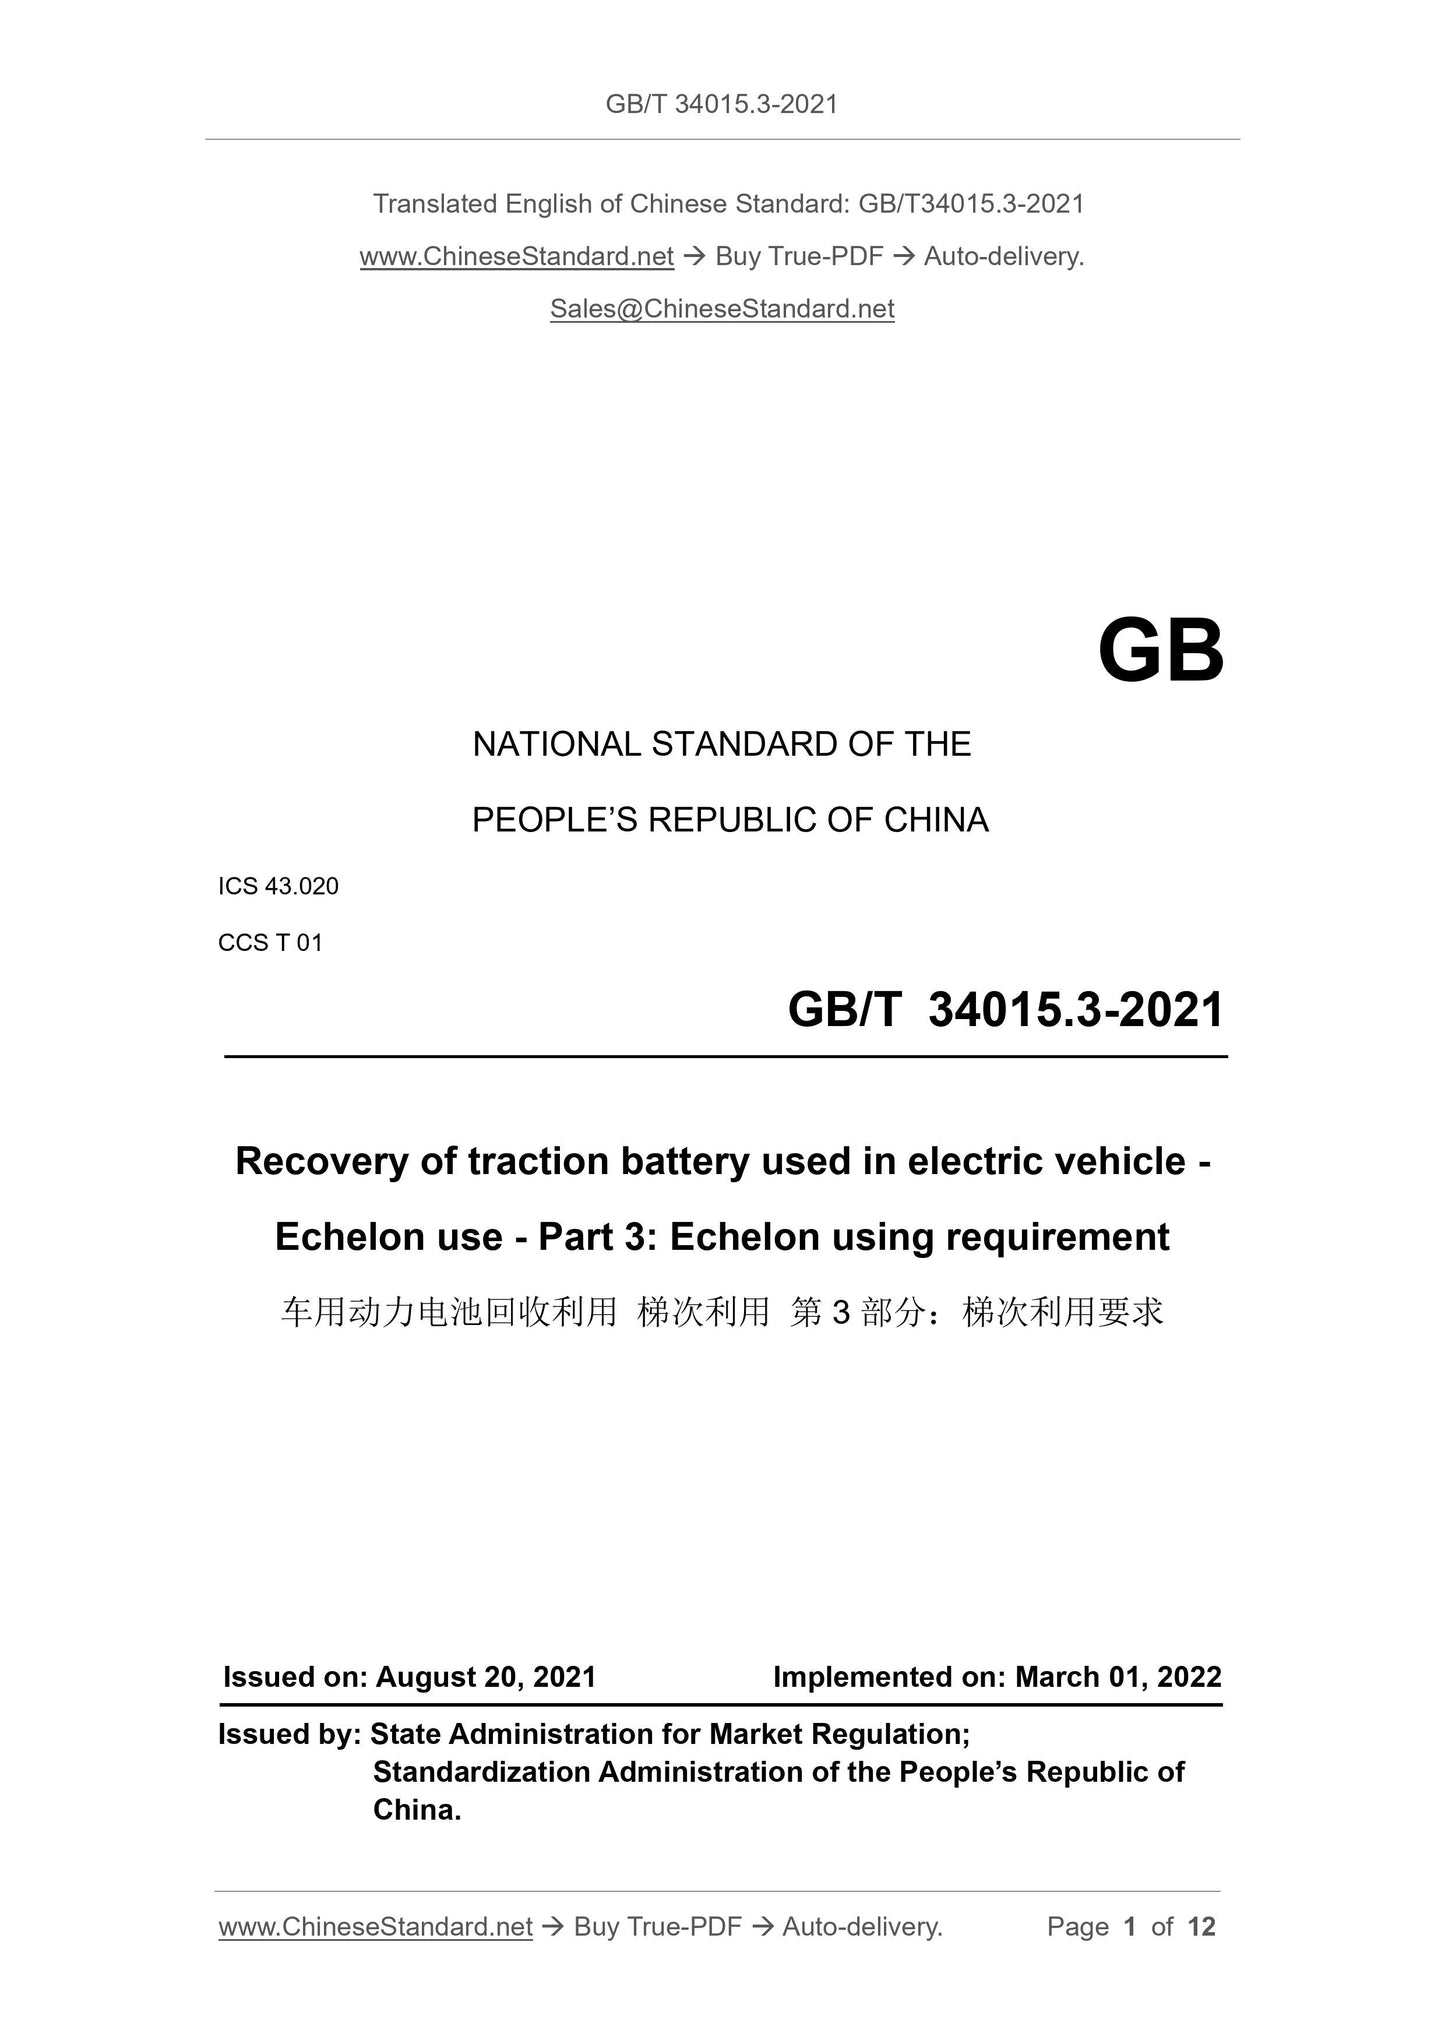 GB/T 34015.3-2021 Page 1